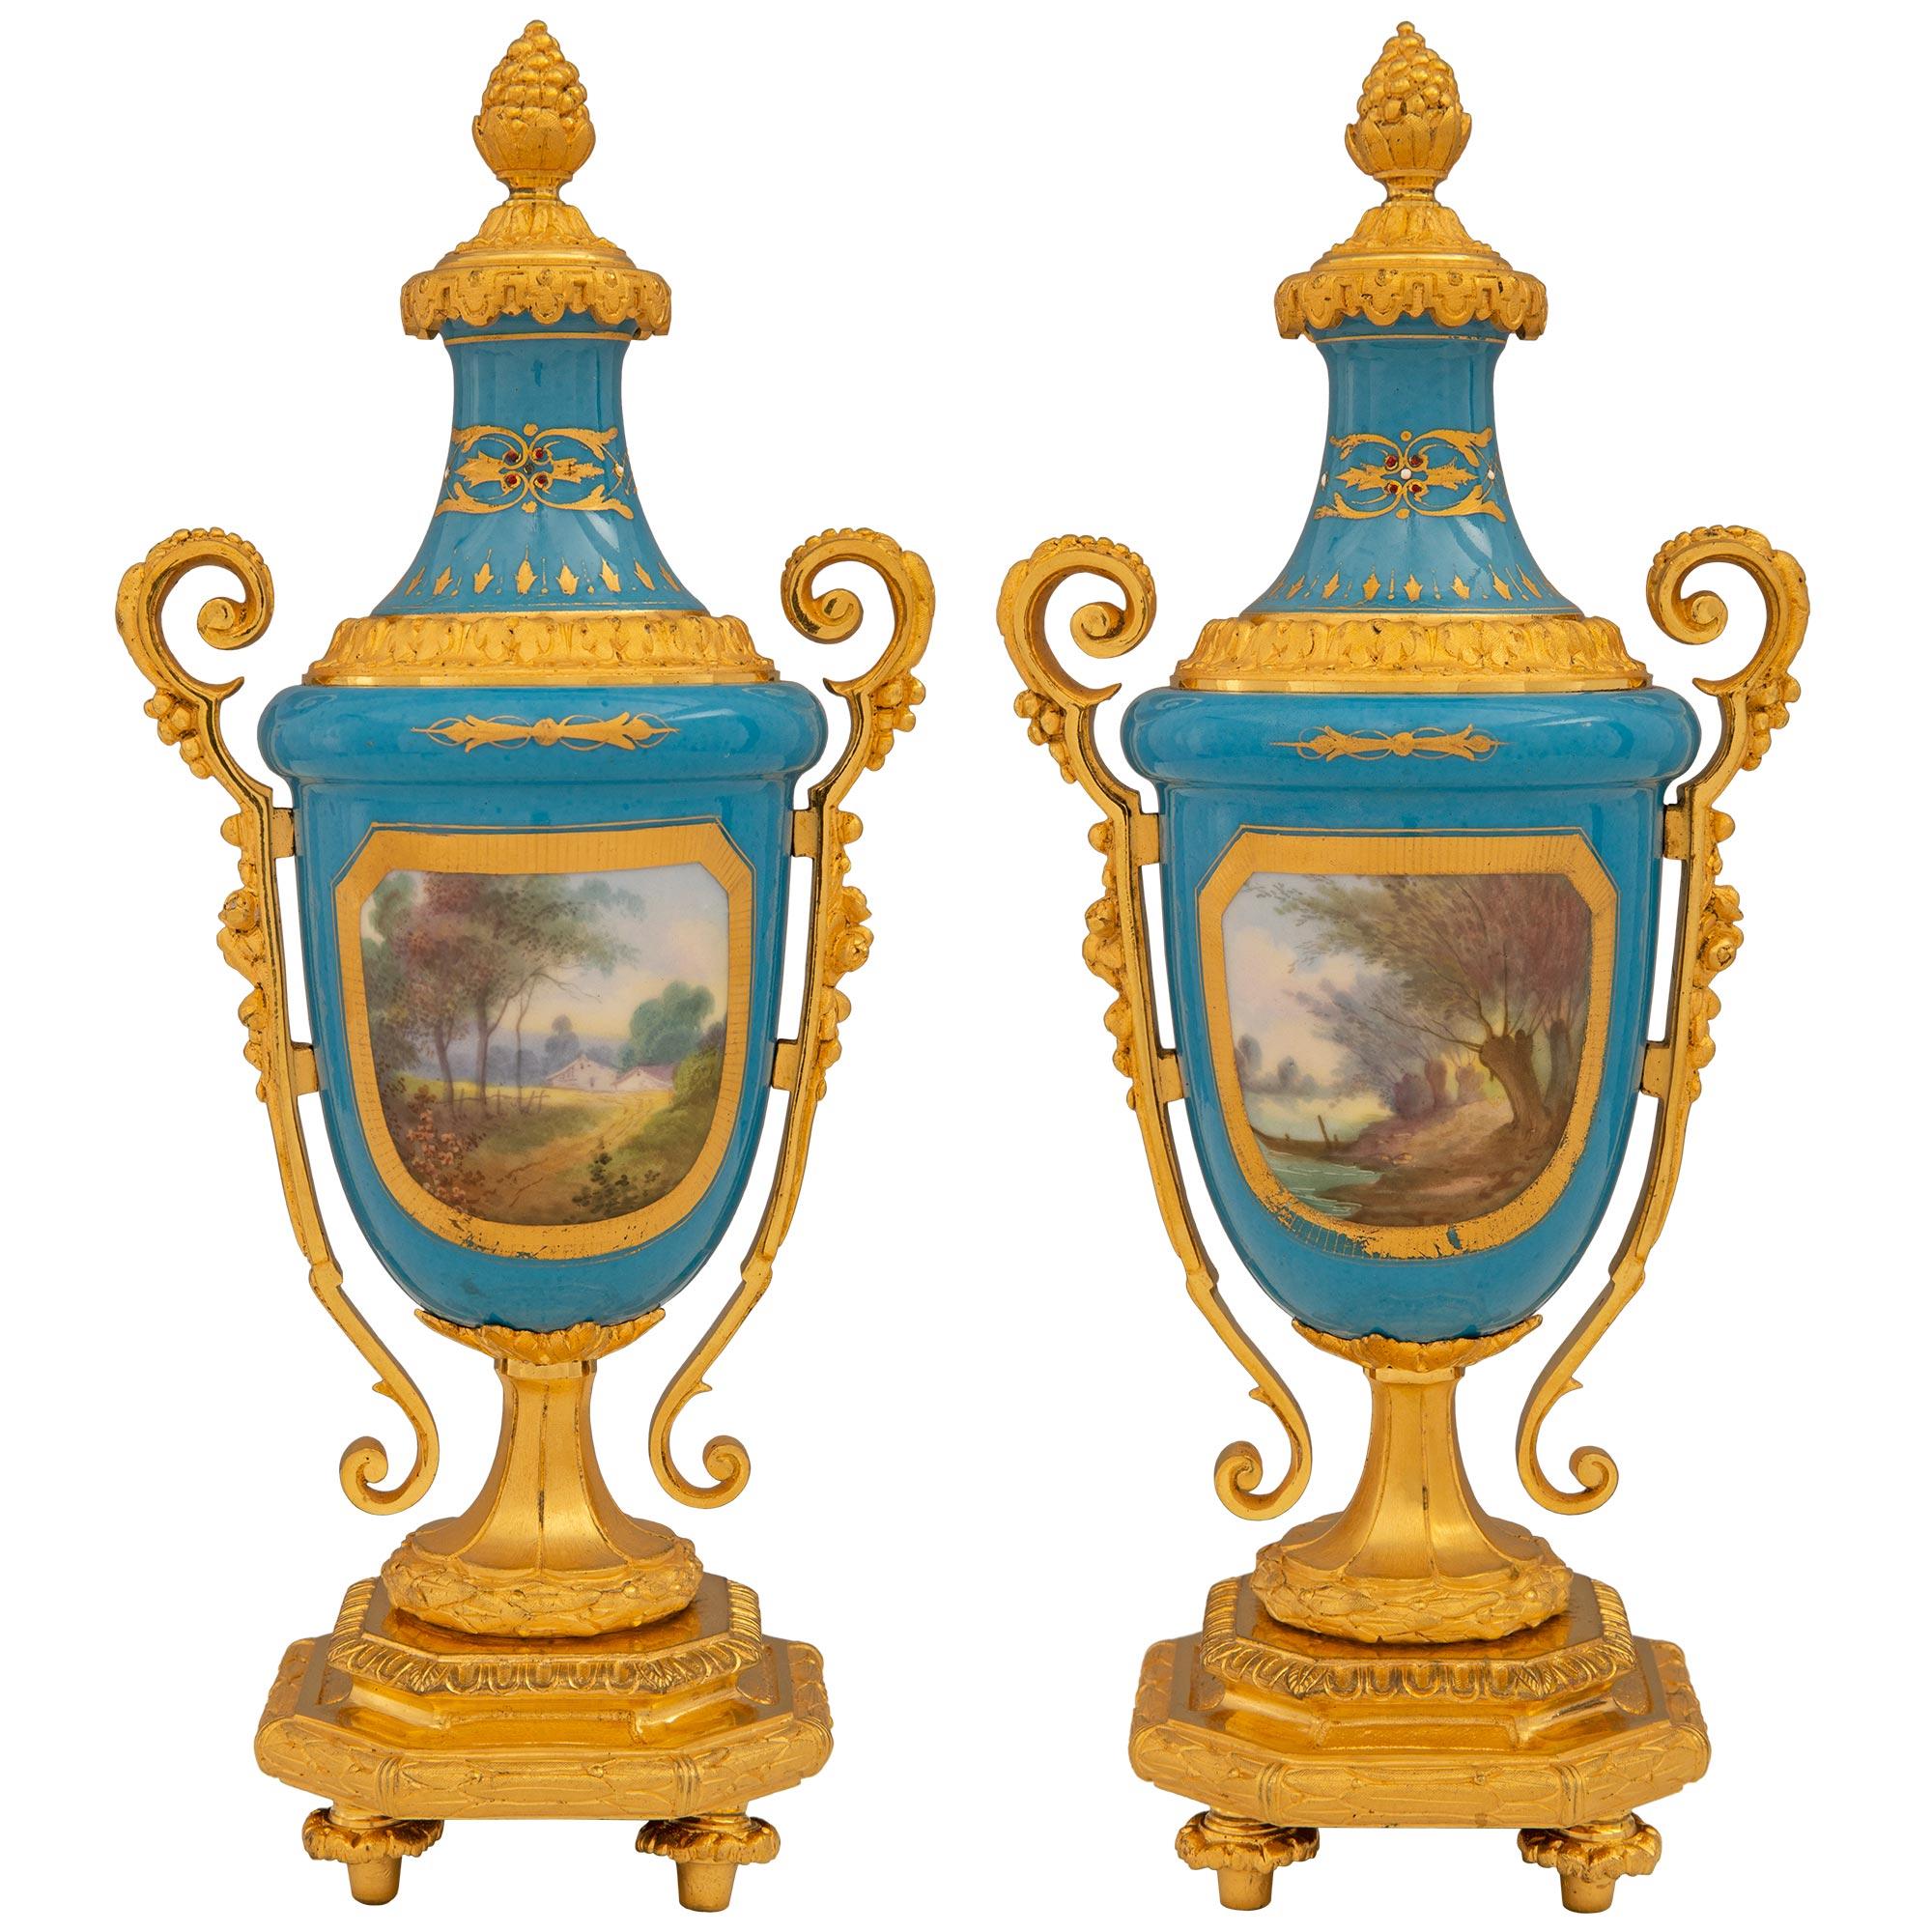 A charming pair of French 19th century Louis XVI st. Sèvres Porcelain and Ormolu lidded urns. The pair of urns are raised on square Ormolu bases supported by topie shaped feet. The edge of the base has a wonderful berried laurel band below a Coeur